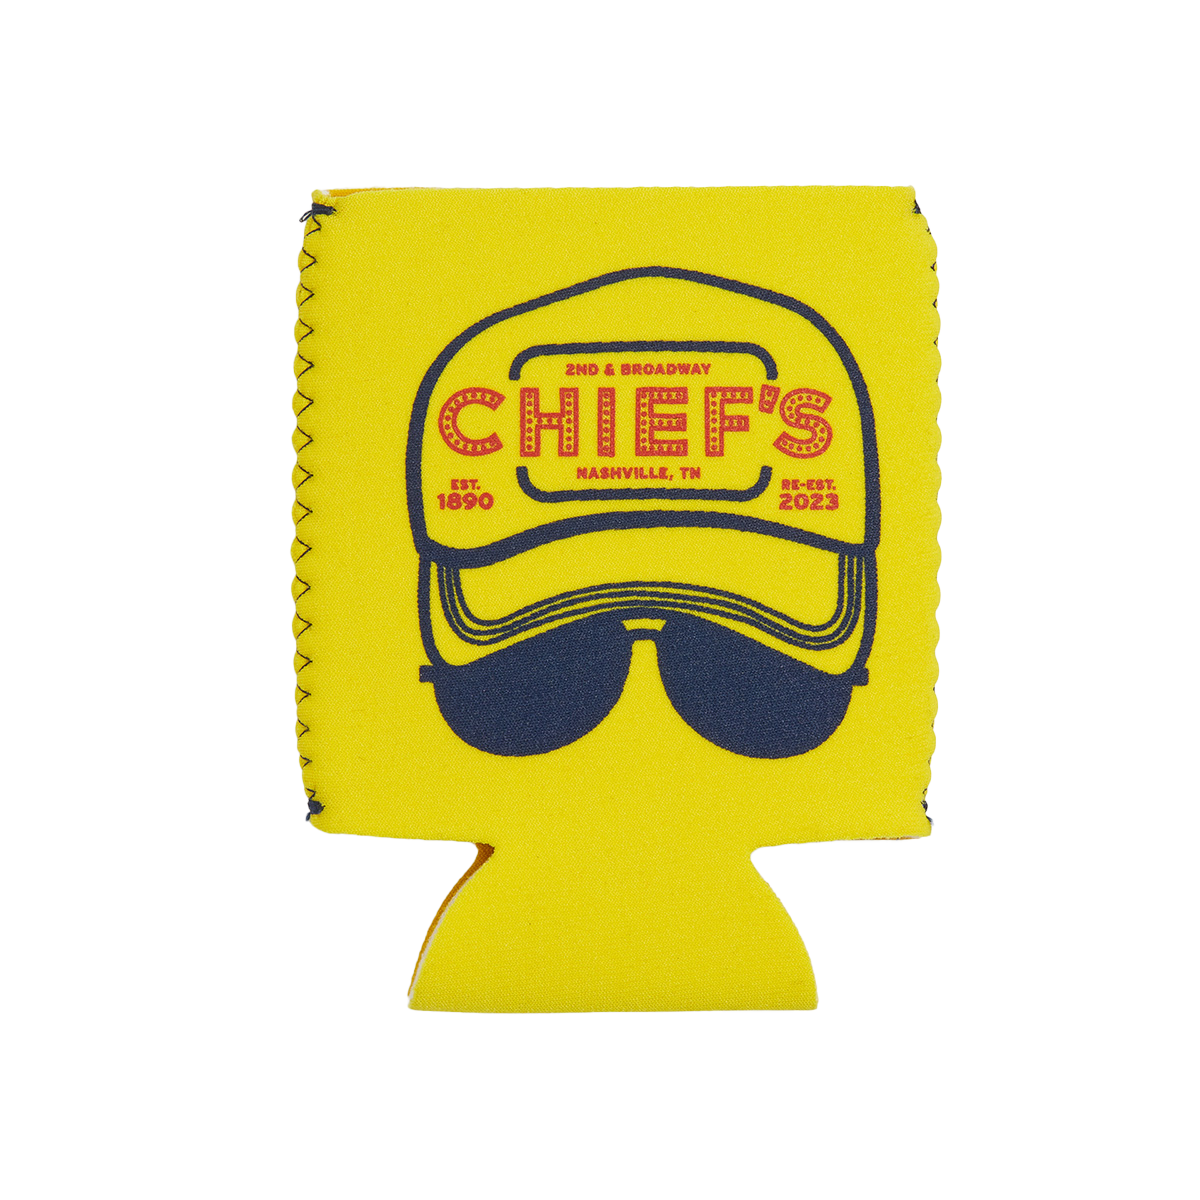 Chief's Drink in My Hand Koozie - Yellow